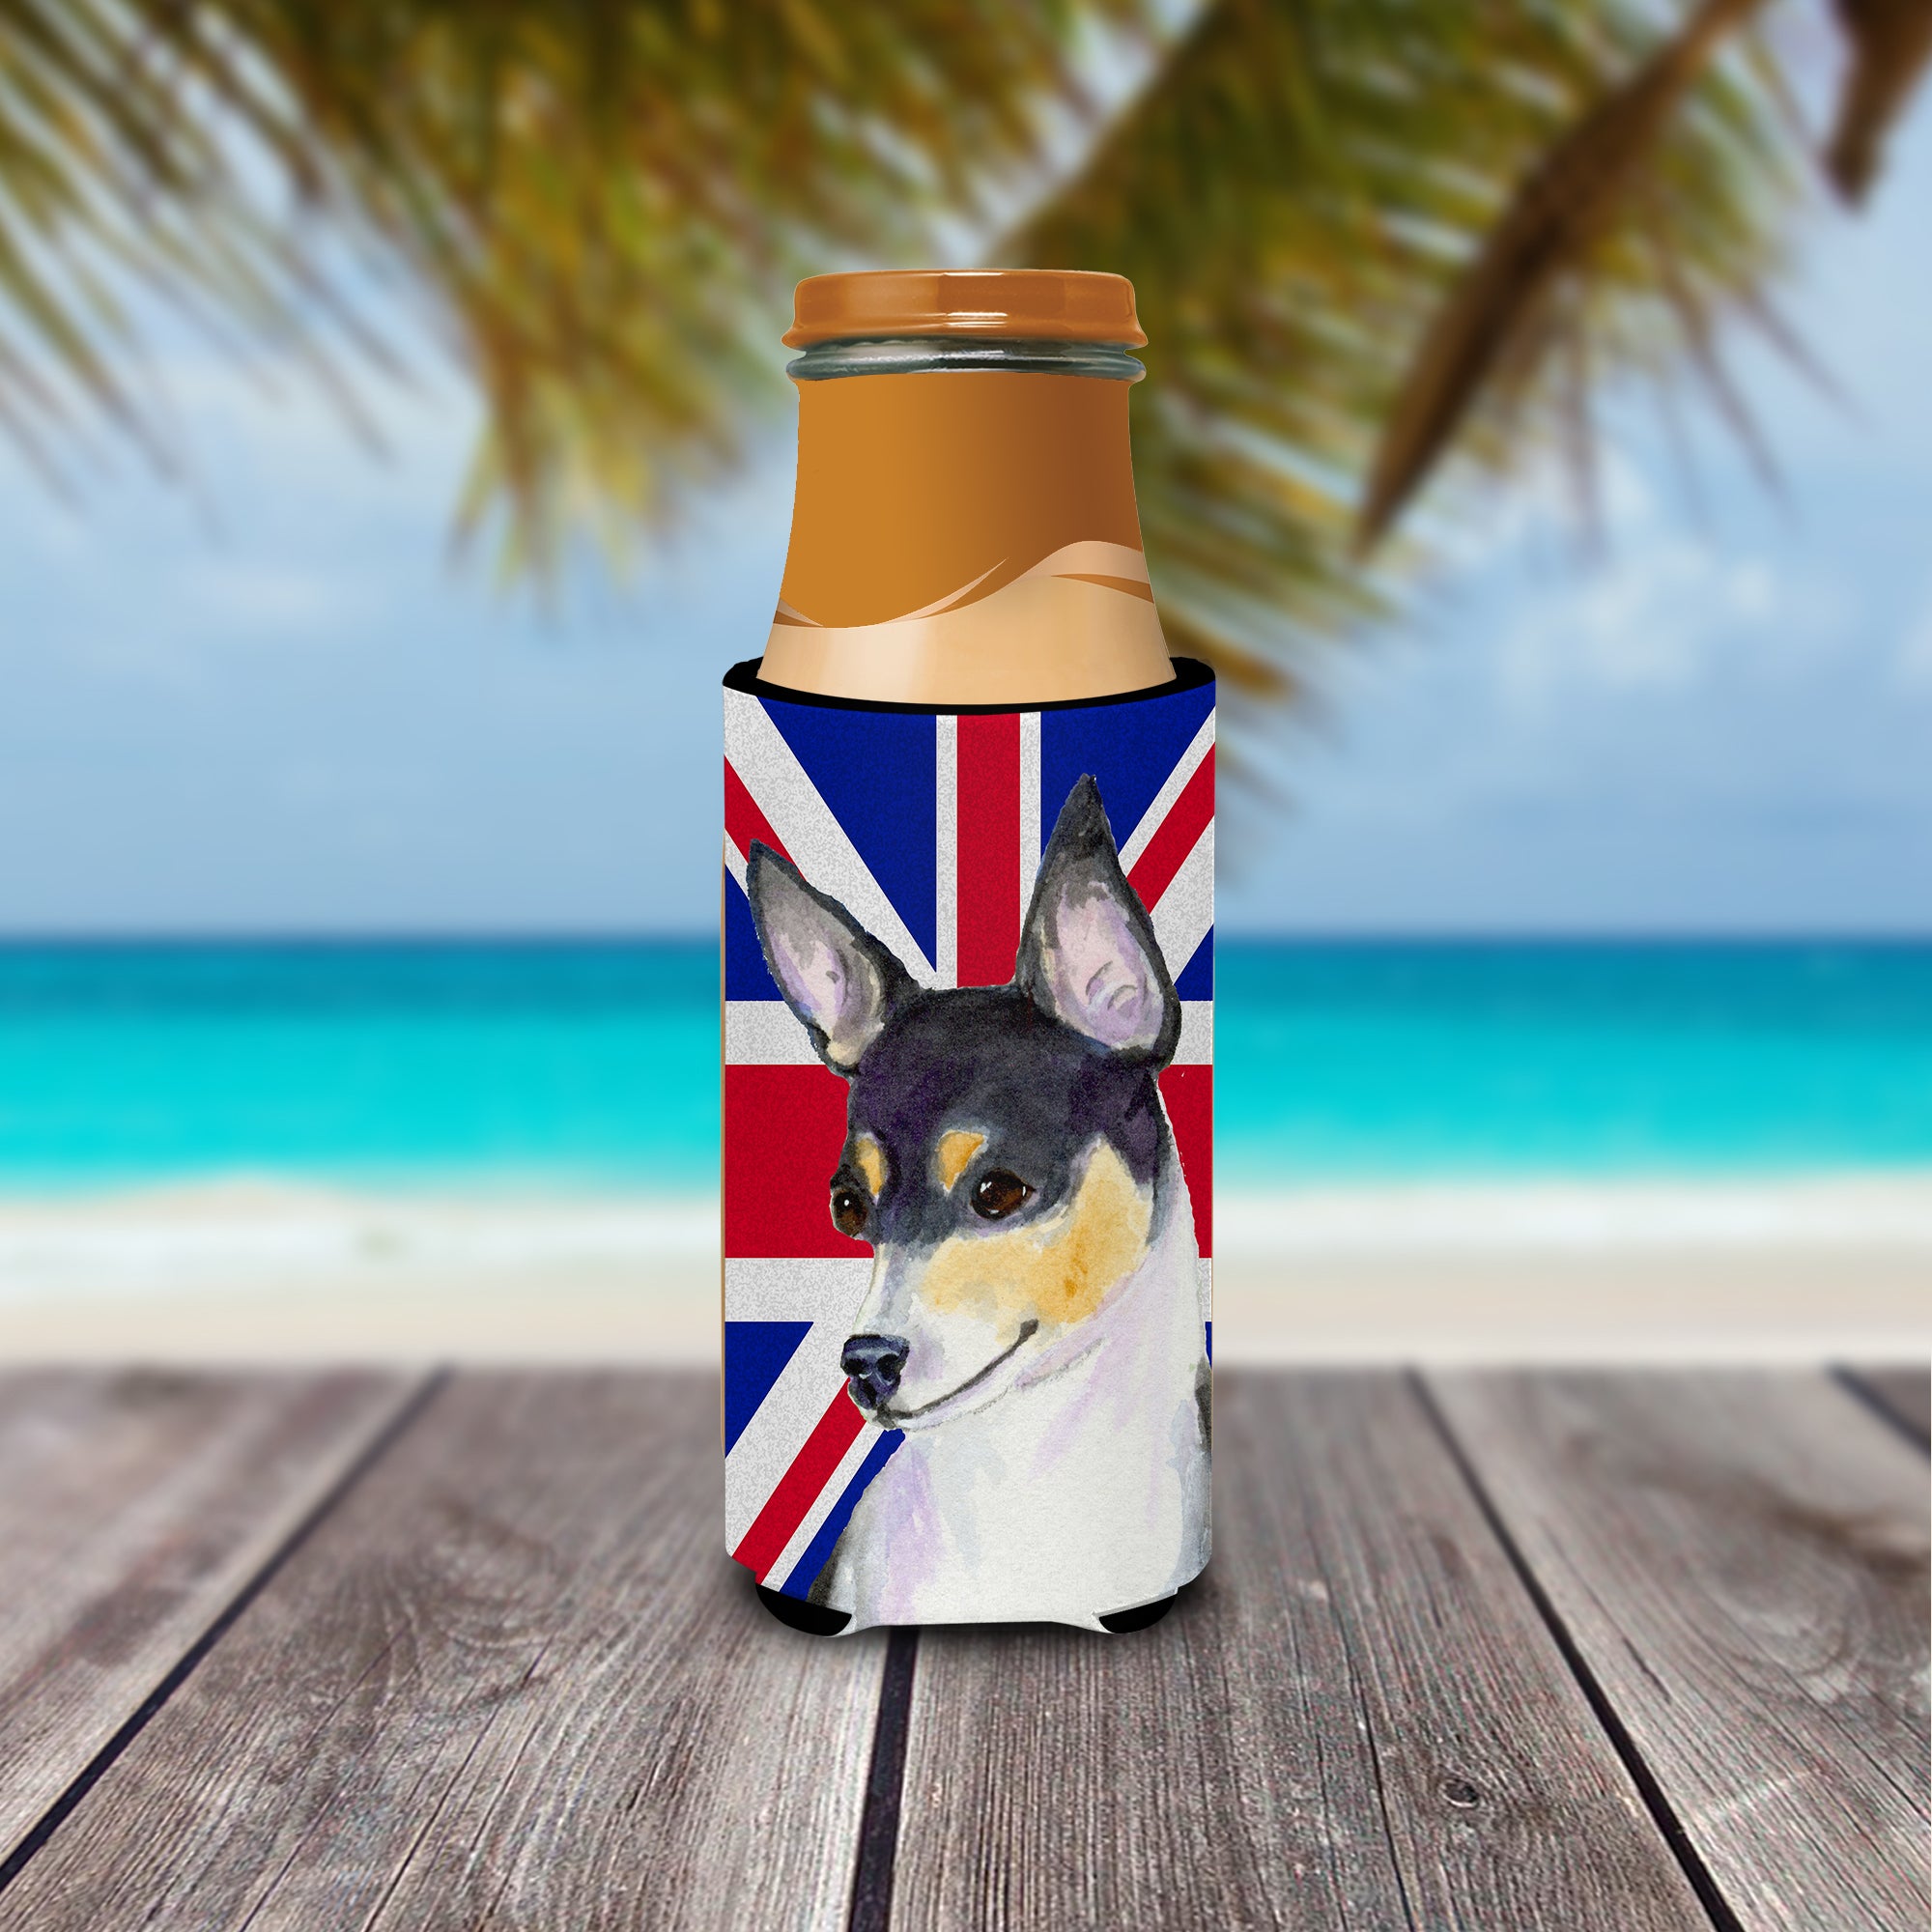 Rat Terrier with English Union Jack British Flag Ultra Beverage Insulators for slim cans SS4960MUK